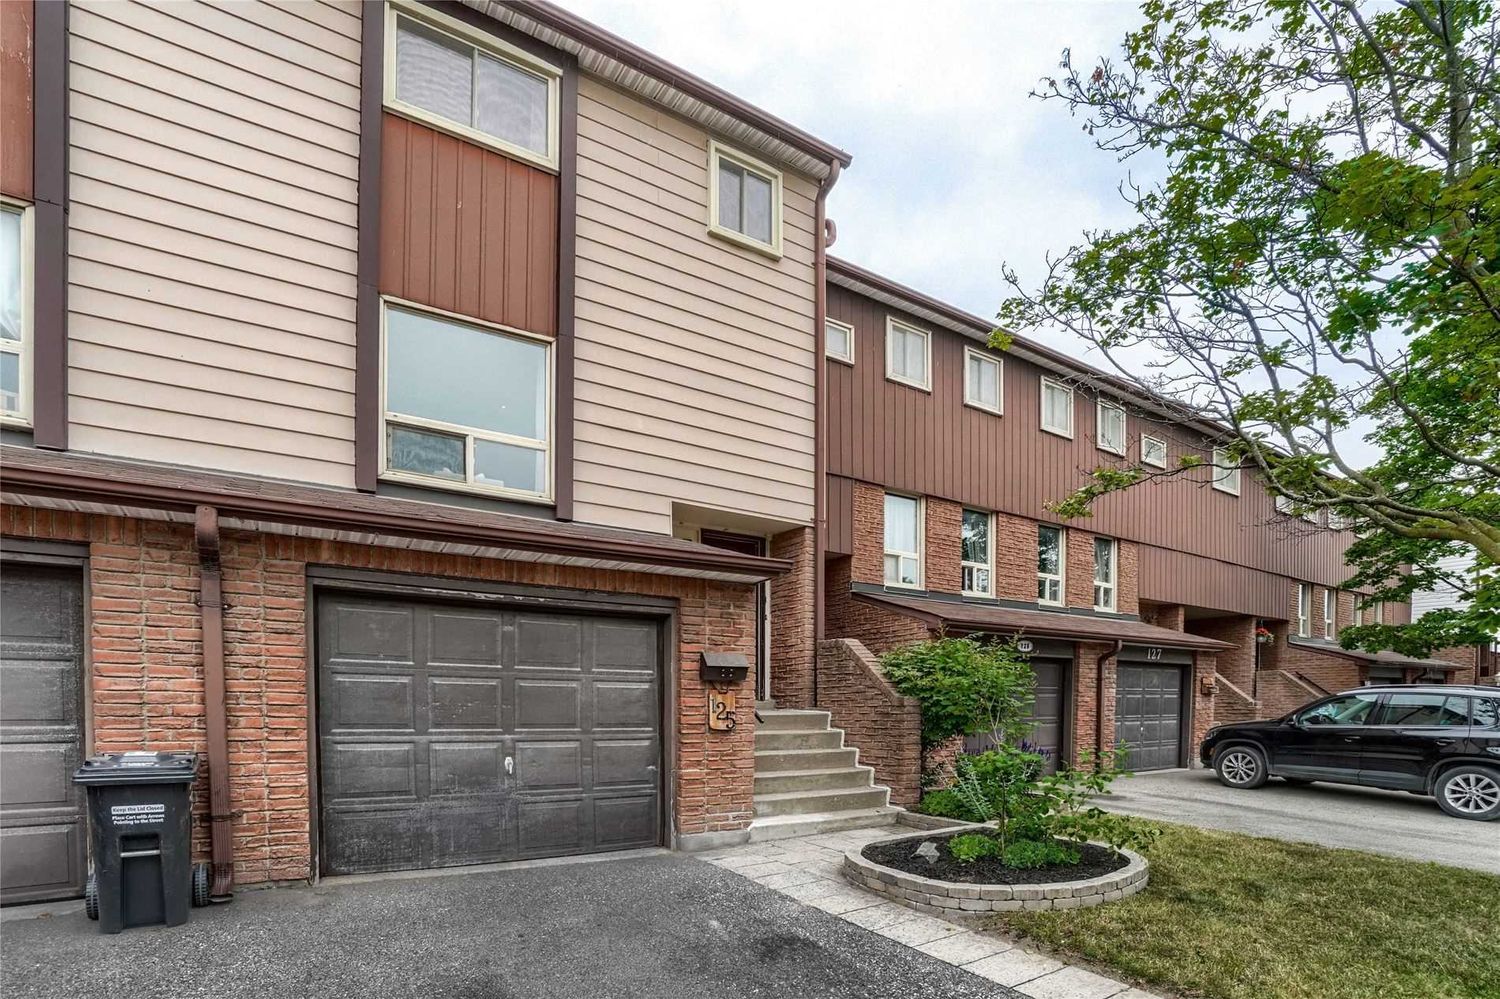 1221 Dundix Road. 1221 Dundix Road Townhomes is located in  Mississauga, Toronto - image #1 of 3